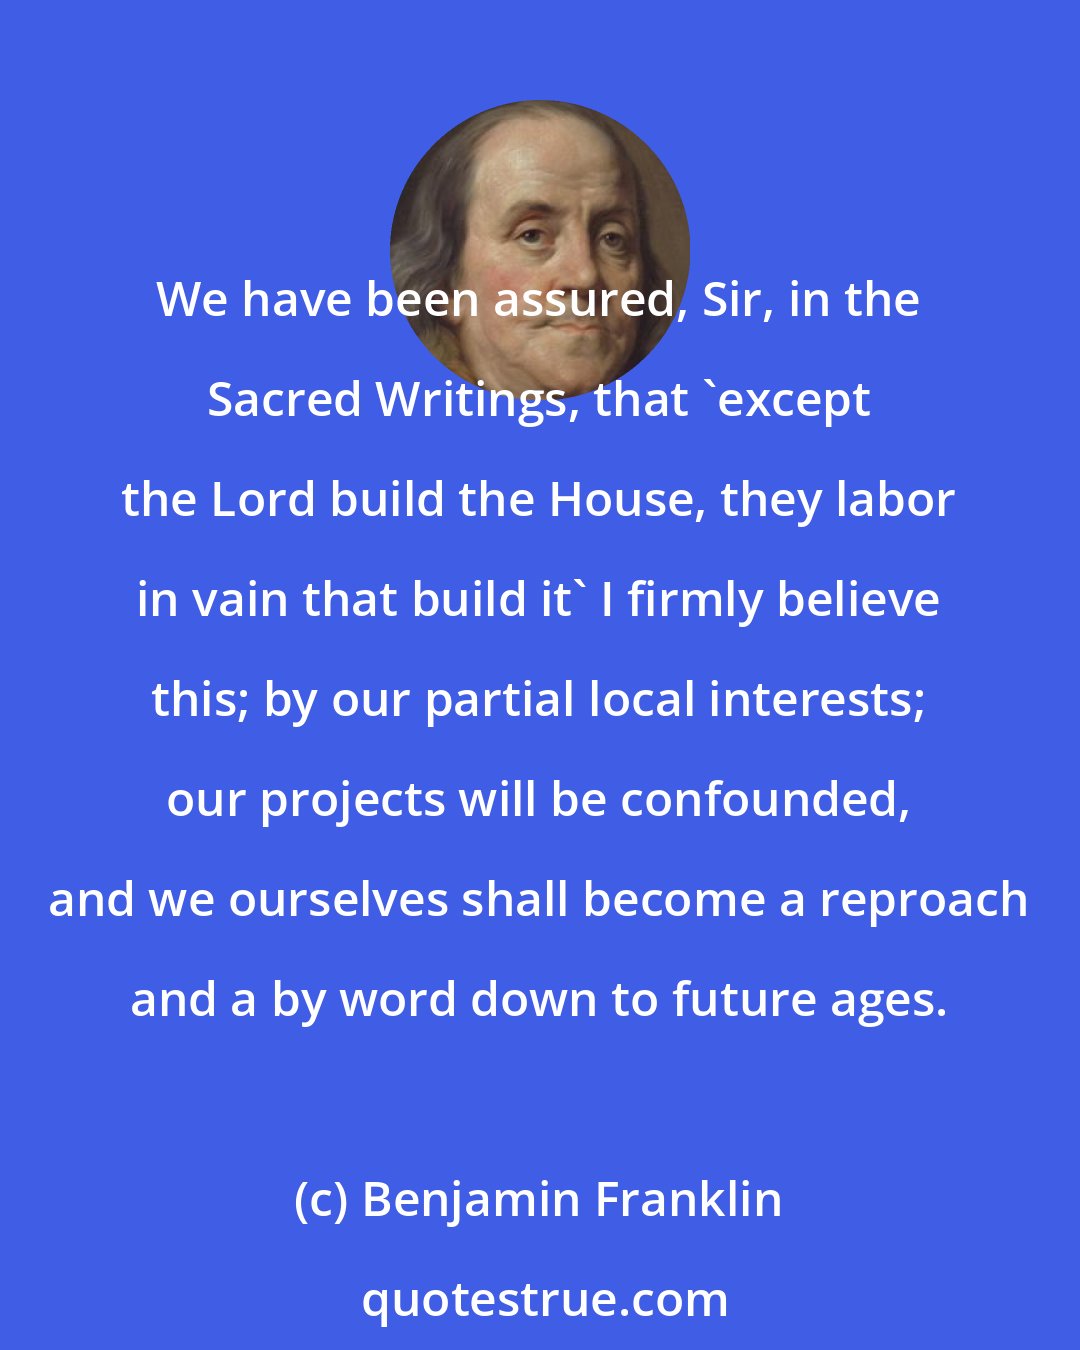 Benjamin Franklin: We have been assured, Sir, in the Sacred Writings, that 'except the Lord build the House, they labor in vain that build it' I firmly believe this; by our partial local interests; our projects will be confounded, and we ourselves shall become a reproach and a by word down to future ages.